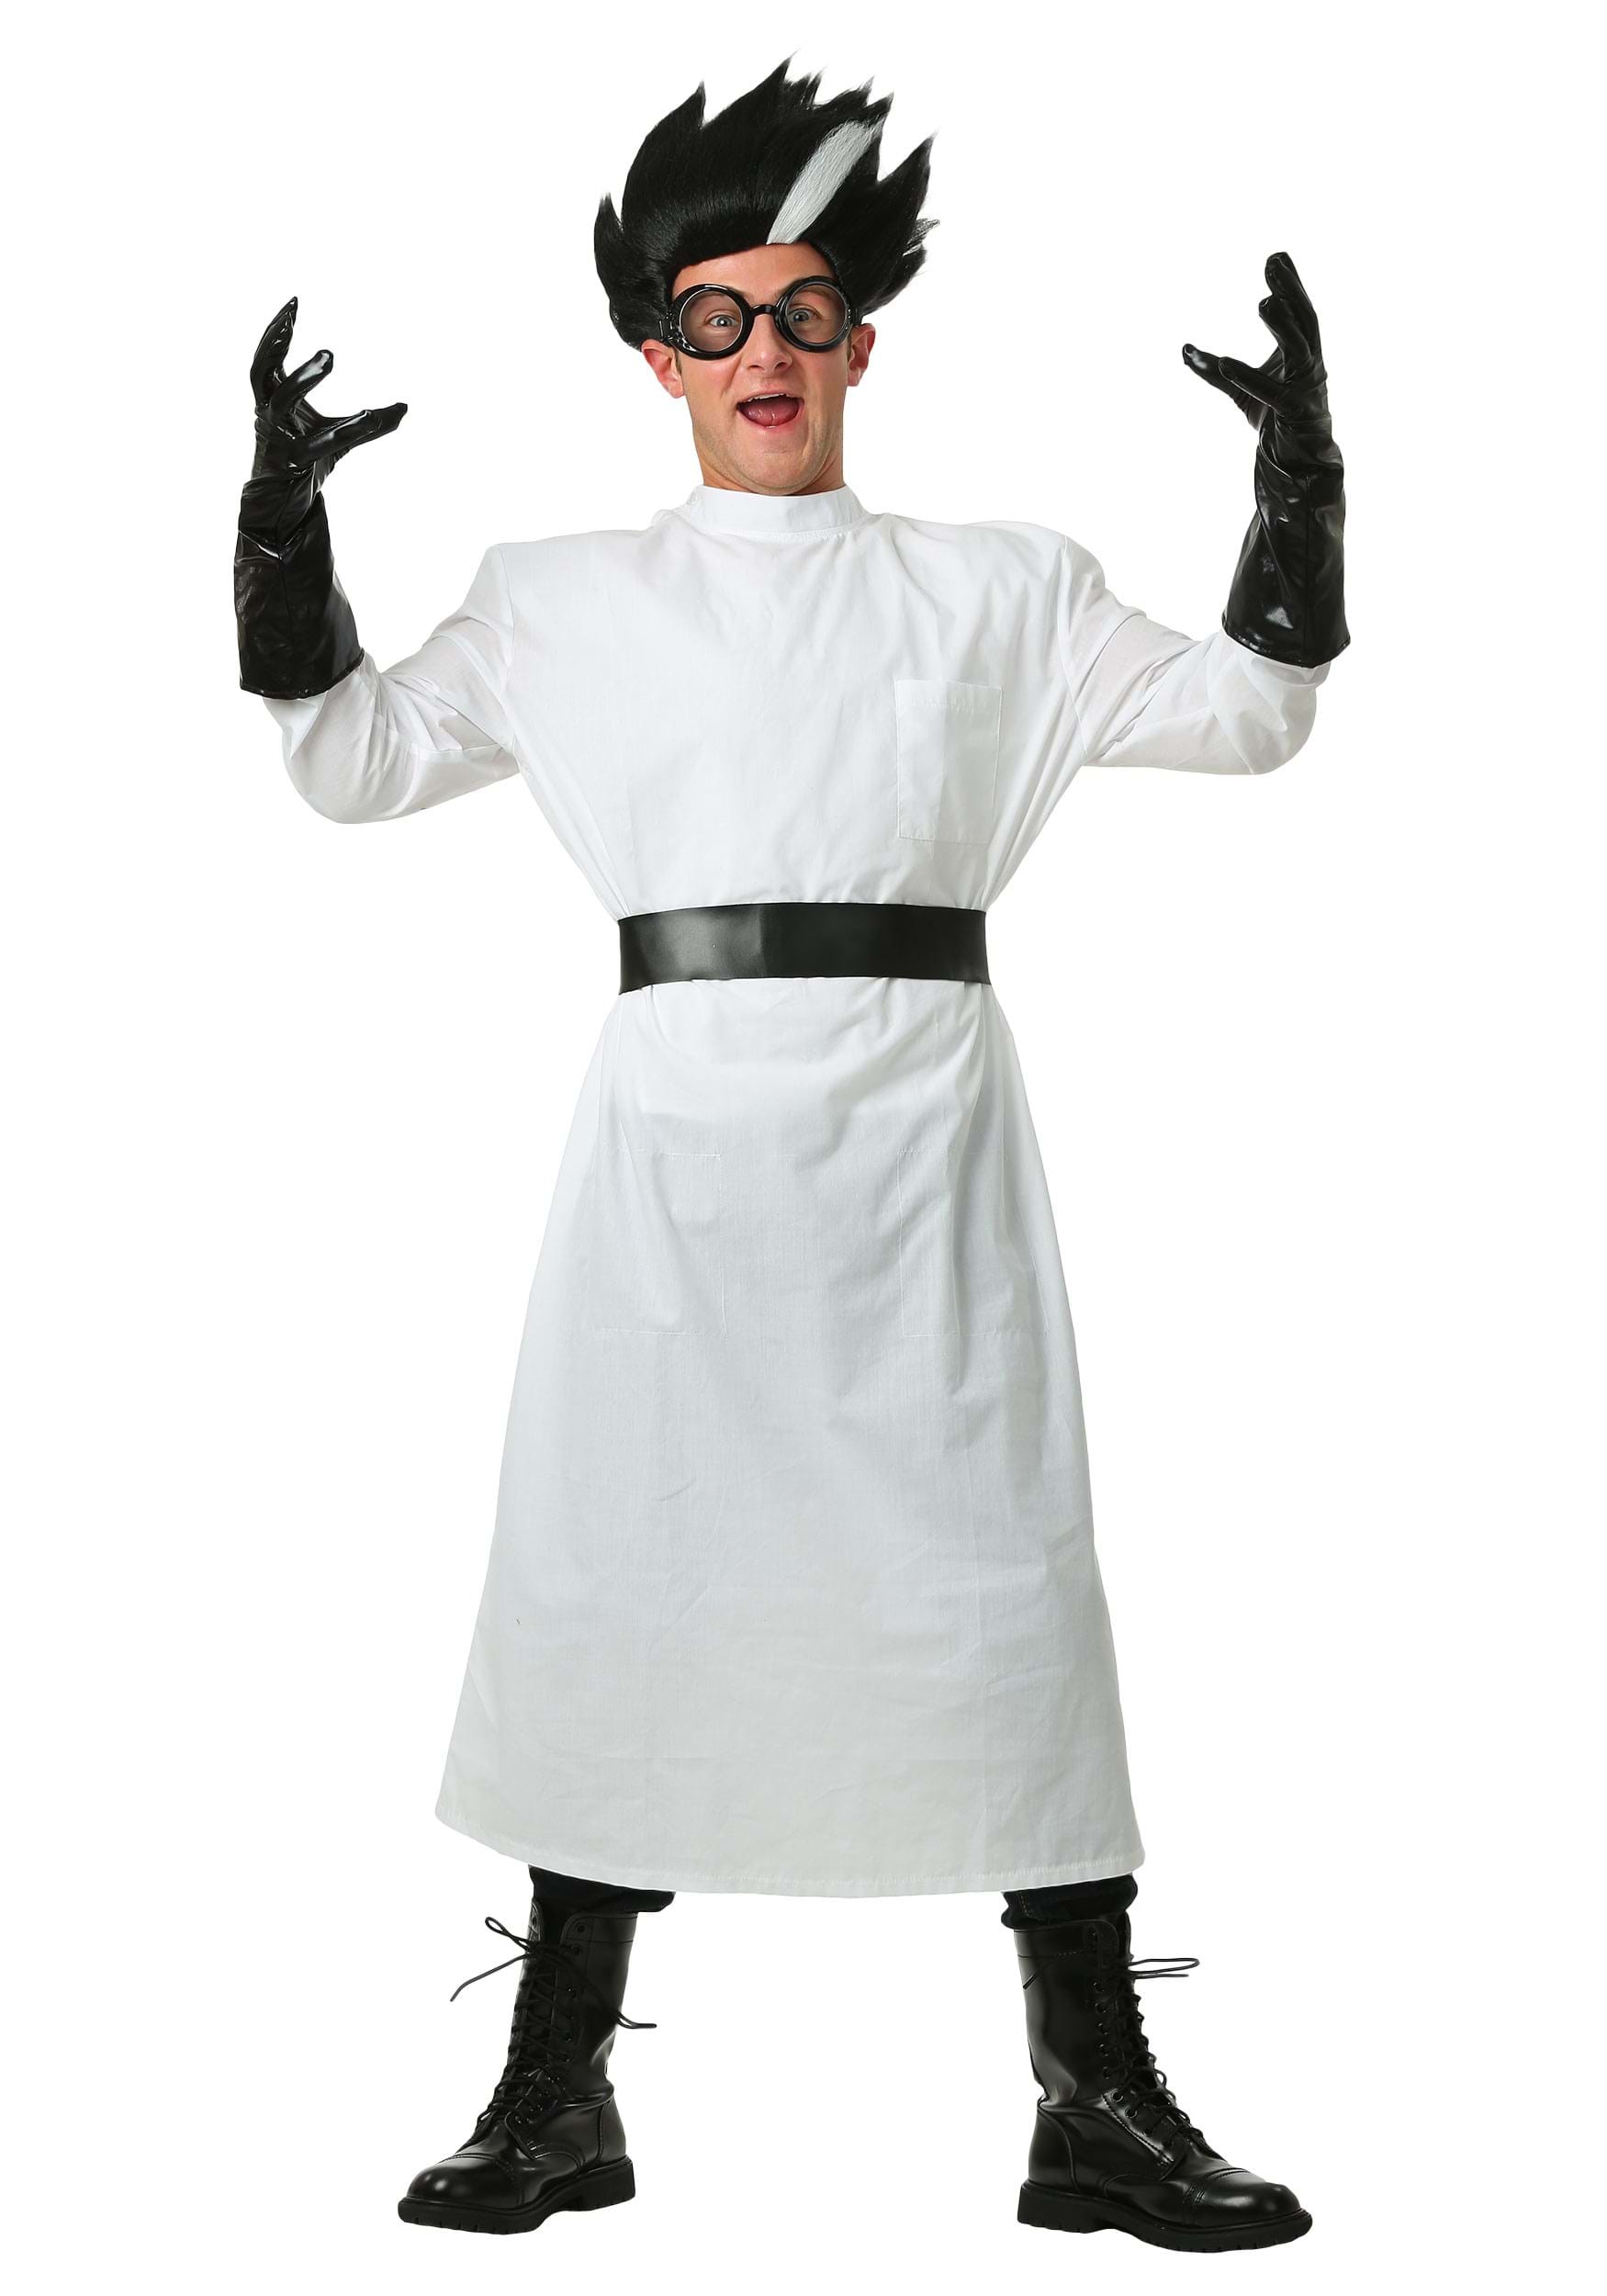 Image of Plus Size Deluxe Mad Scientist Costume for Adults ID FUN0148PL-2X